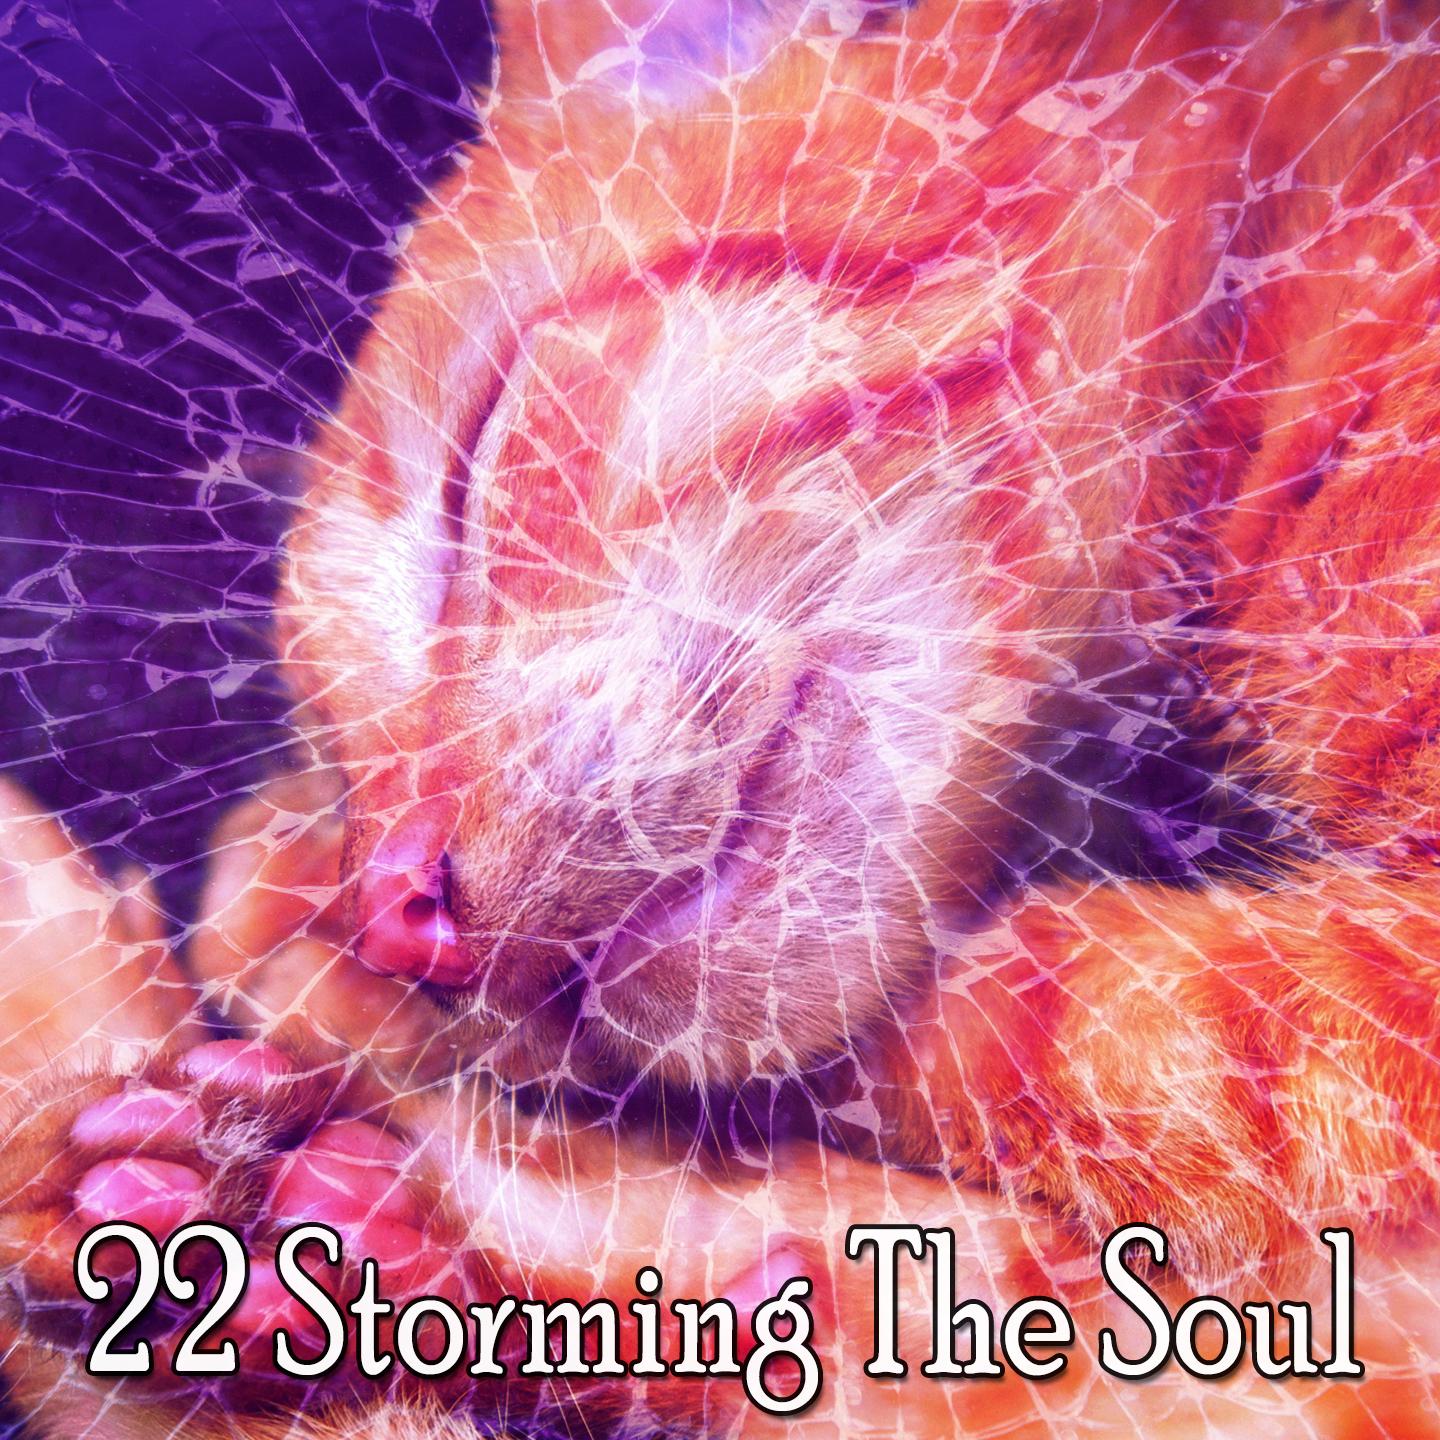 22 Storming the Soul